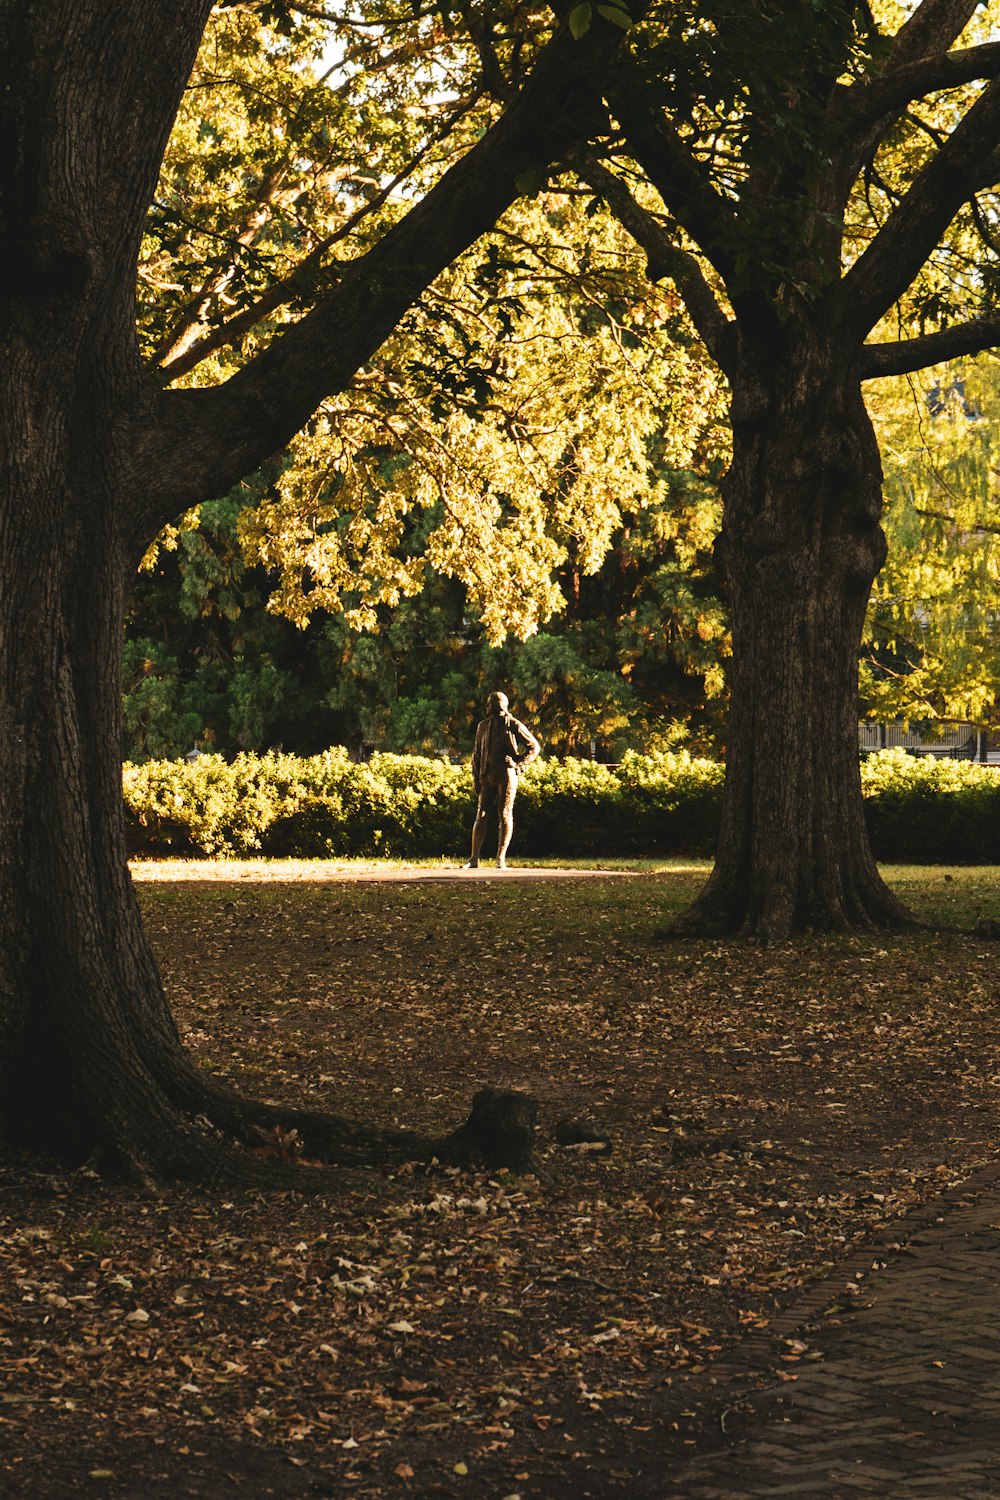 a person walking through a park next to trees